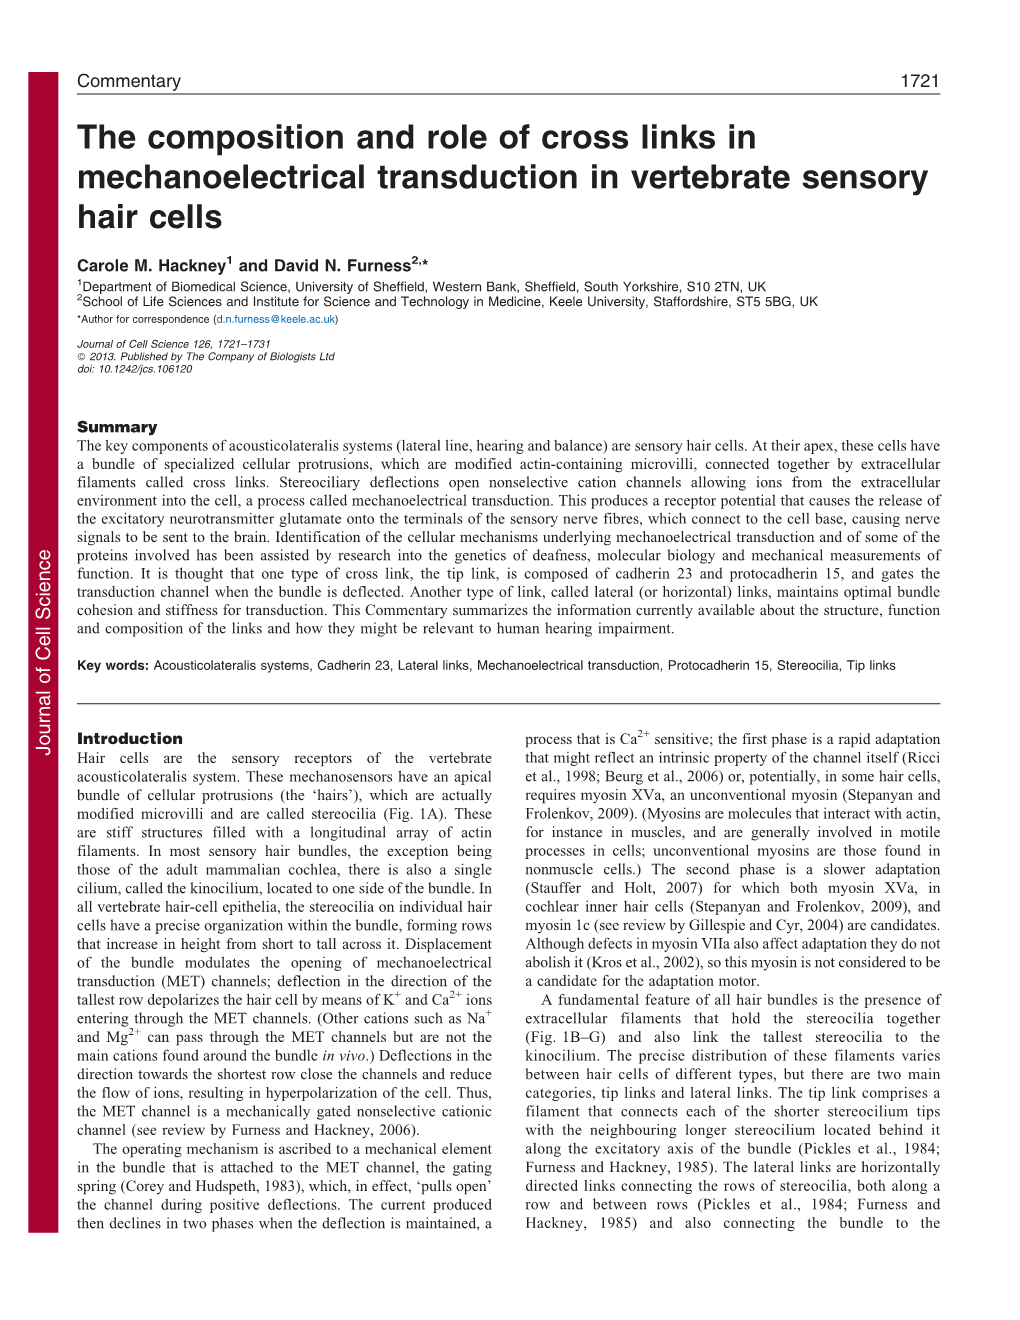 The Composition and Role of Cross Links in Mechanoelectrical Transduction in Vertebrate Sensory Hair Cells